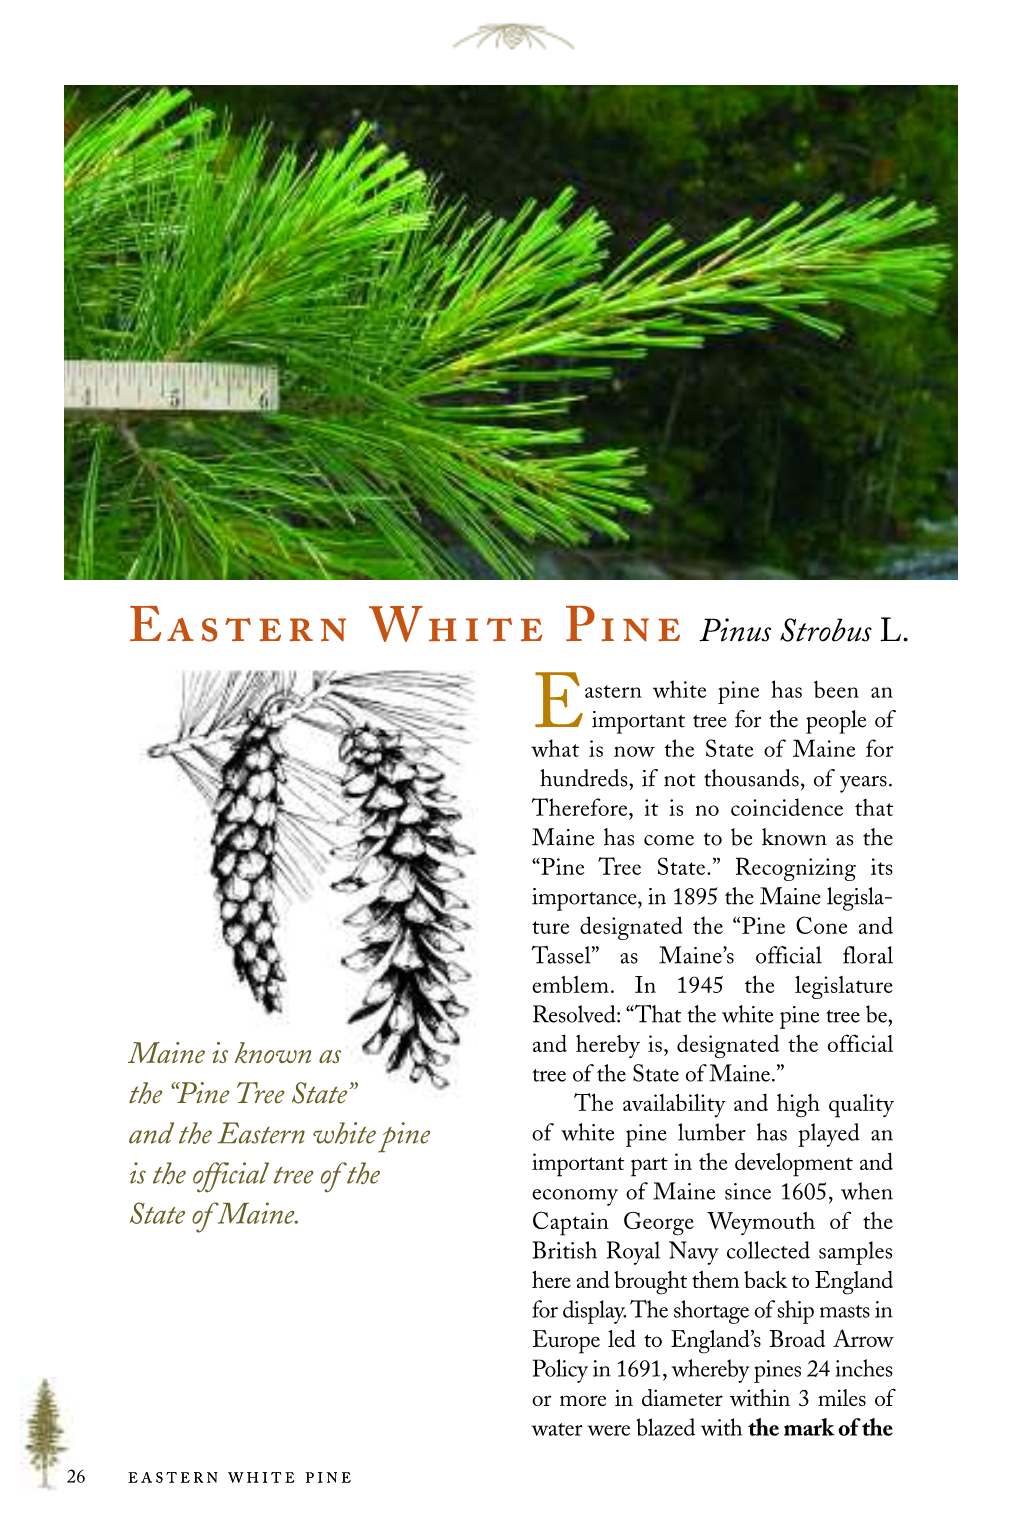 Eastern White Pine Has Been An